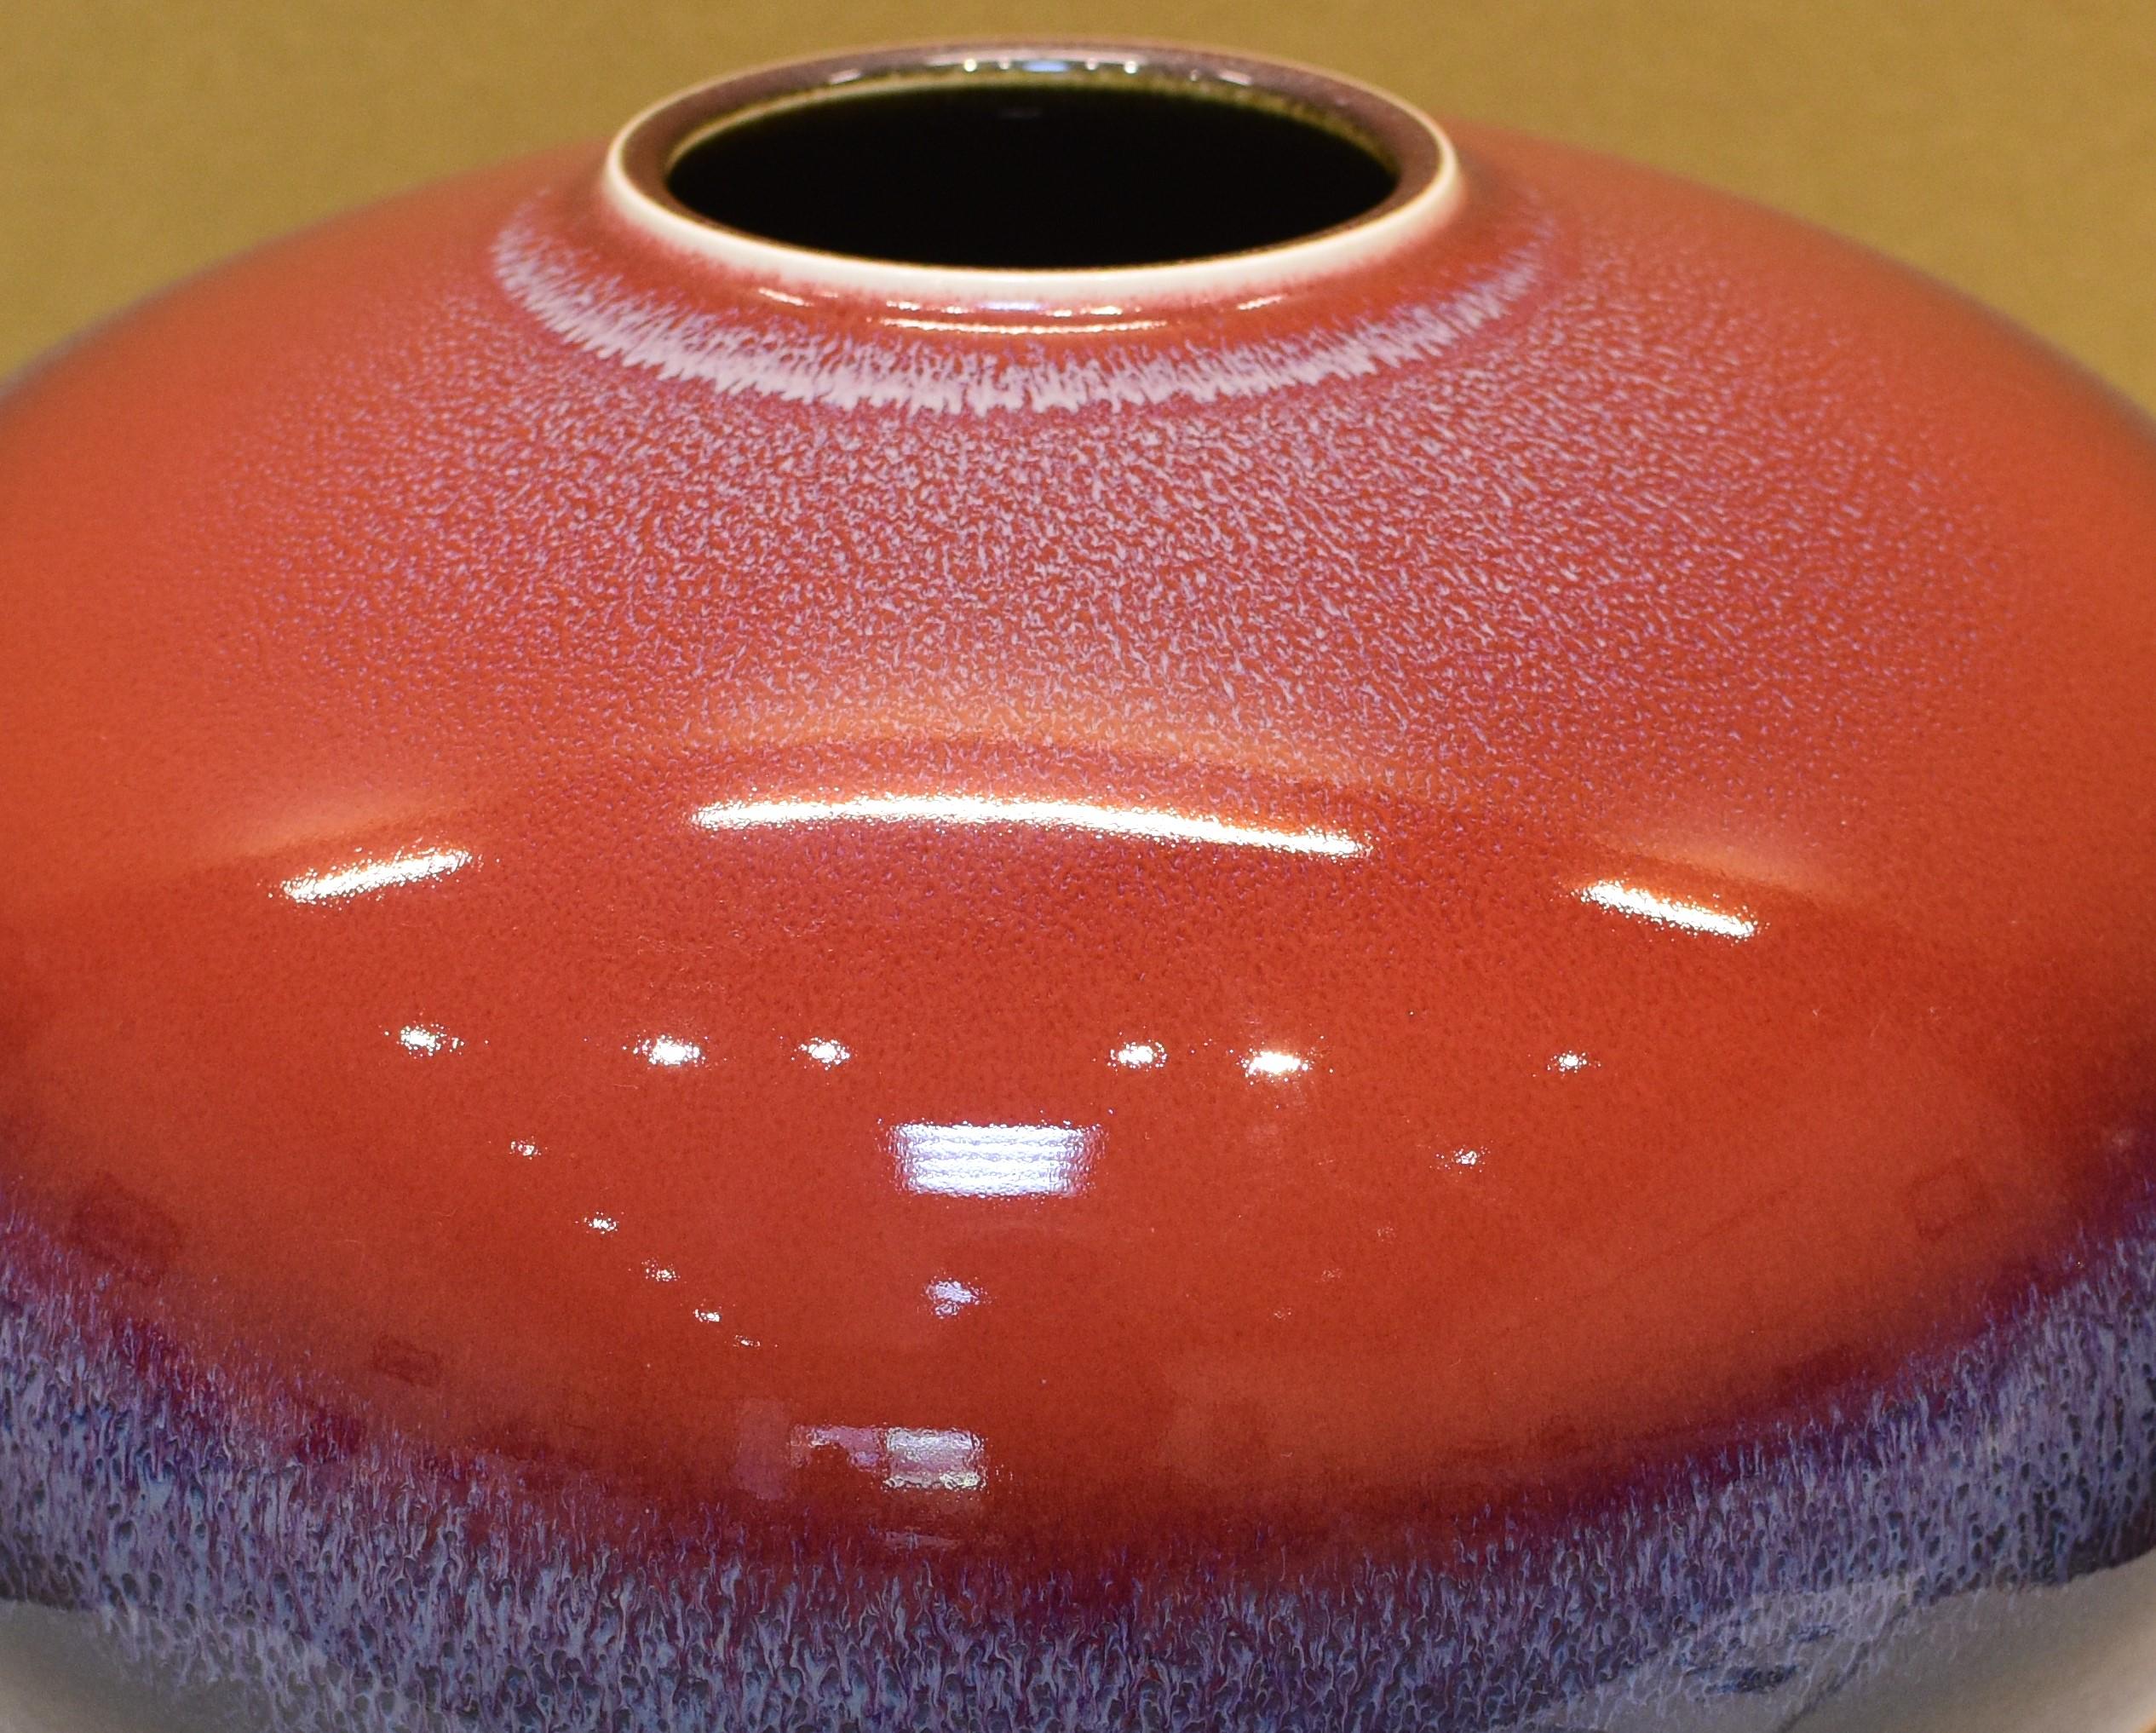 Hand-Crafted Japanese Contemporary Red Black Hand-Glazed Porcelain Vase by Master Artist, 2 For Sale